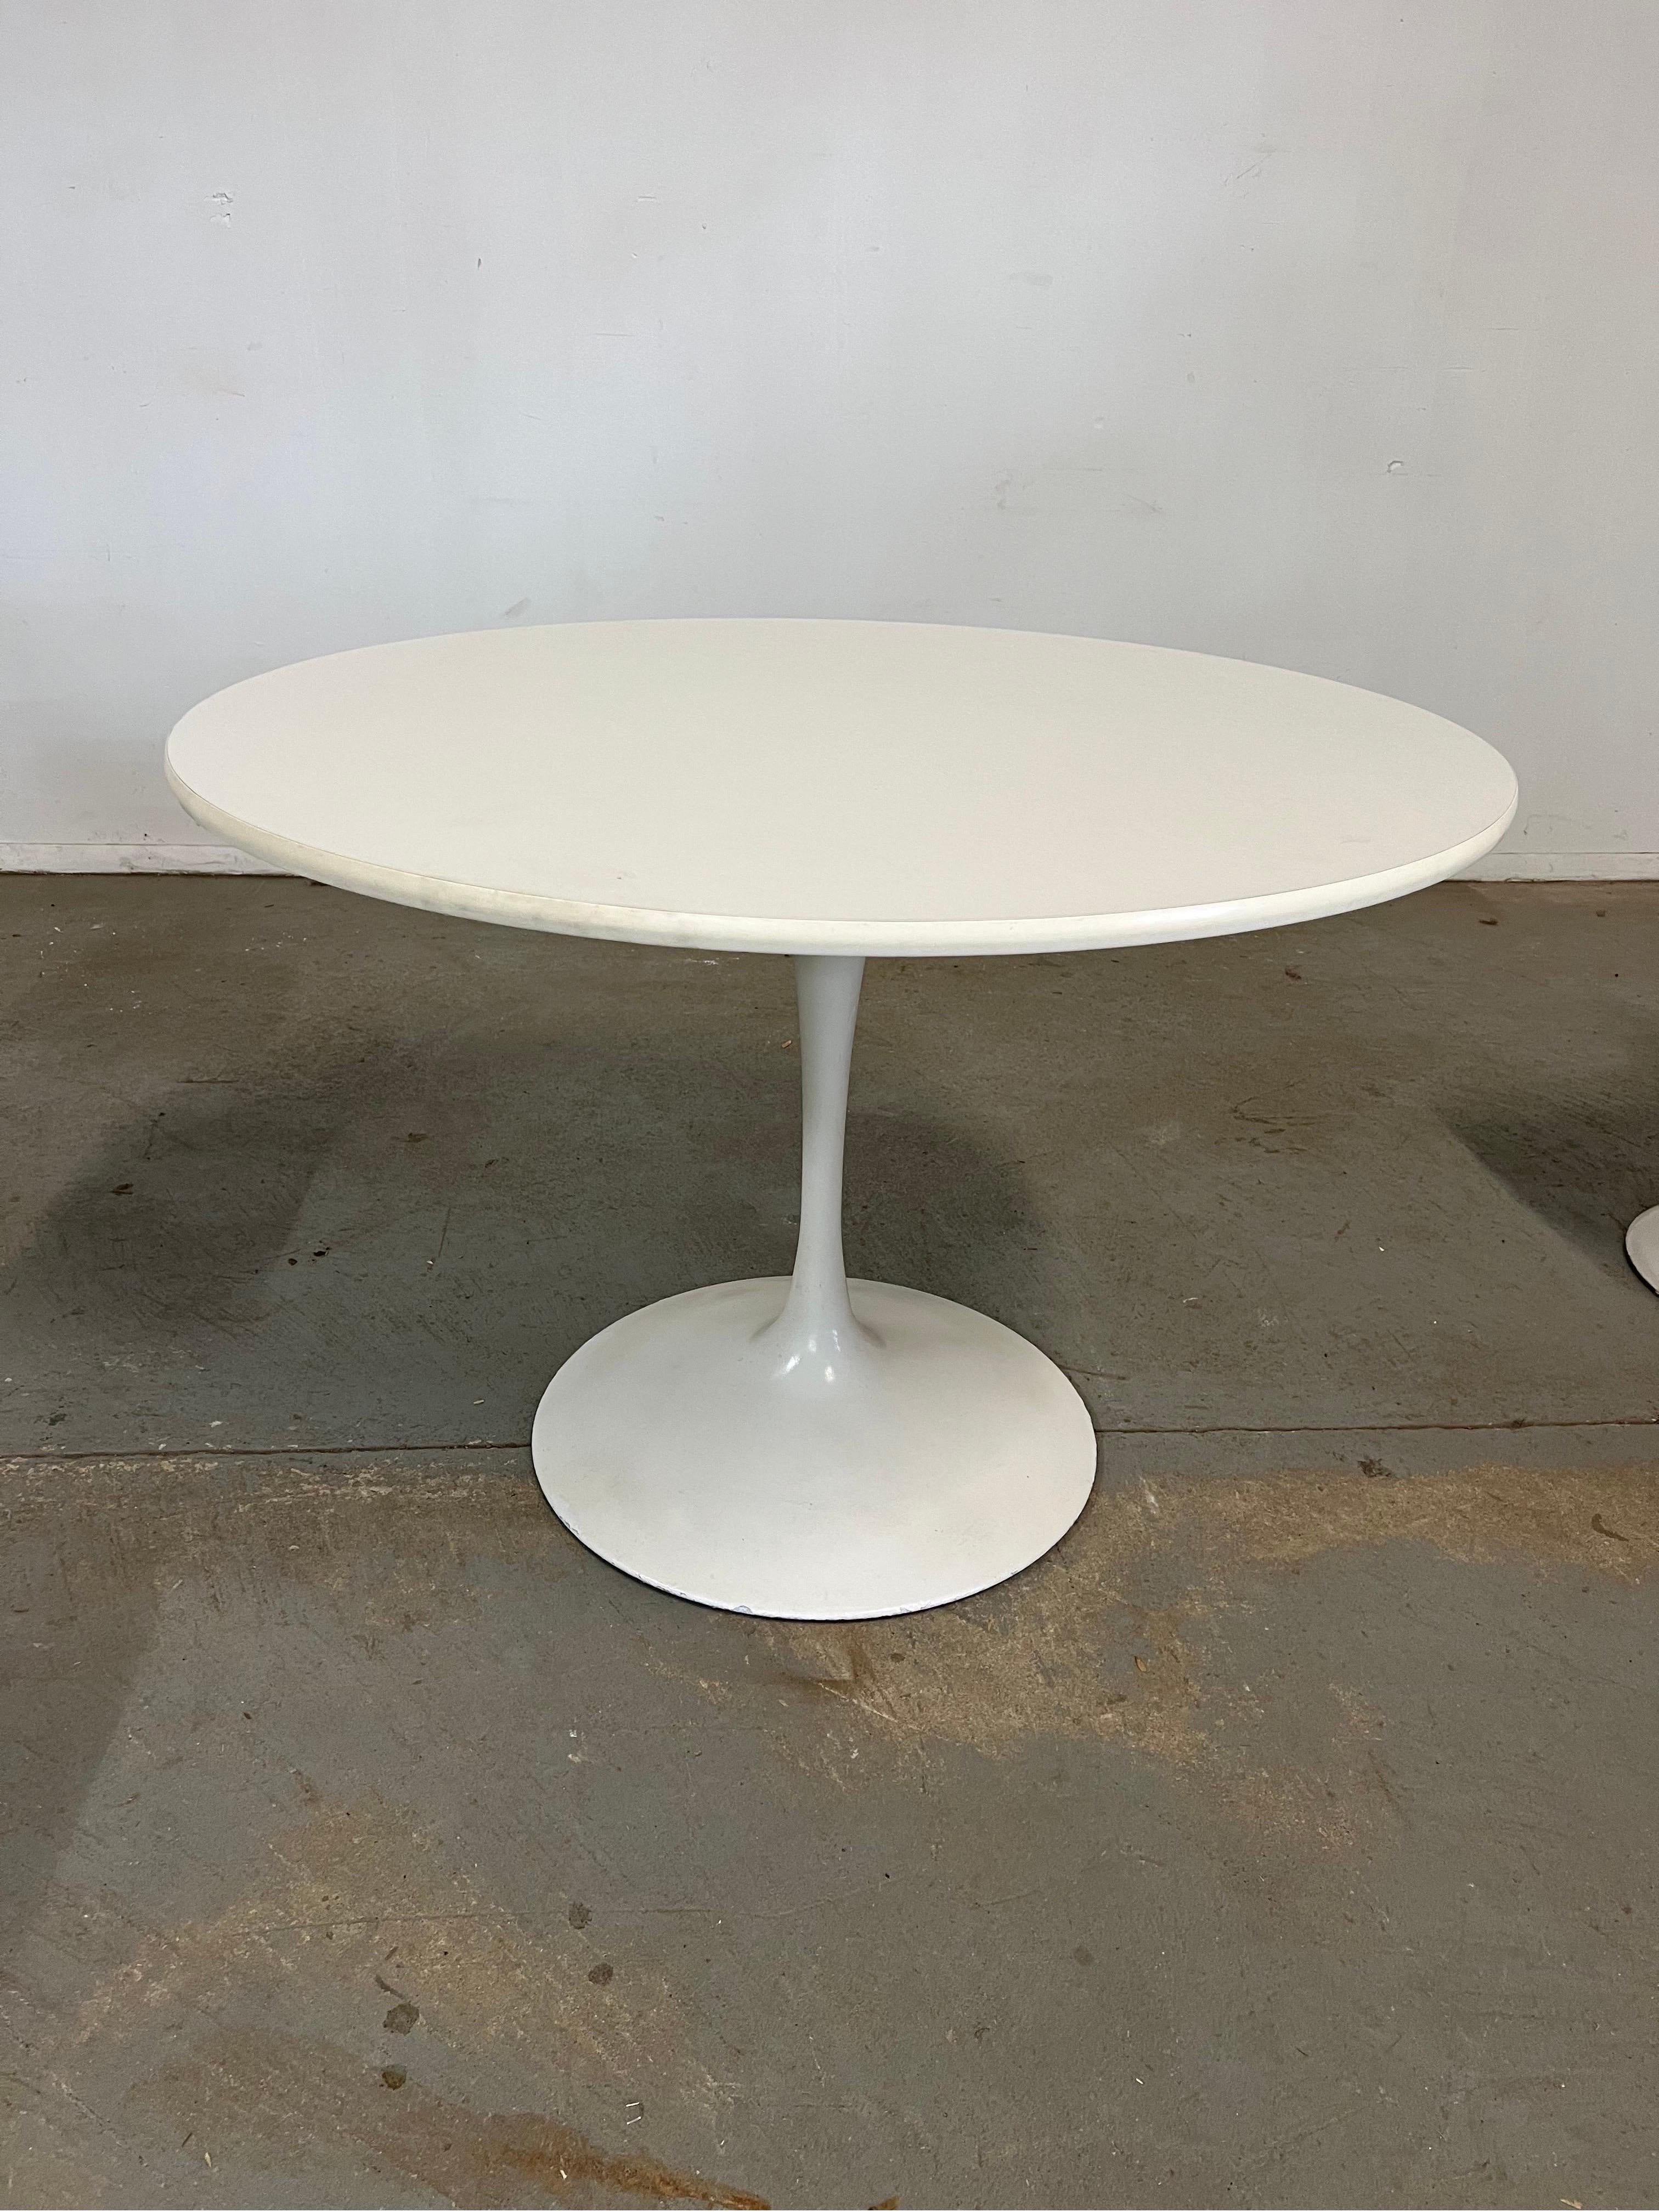 Mid-Century Modern Eero Saarinen Style Tulip Round Dining Table and Chairs For Sale 4